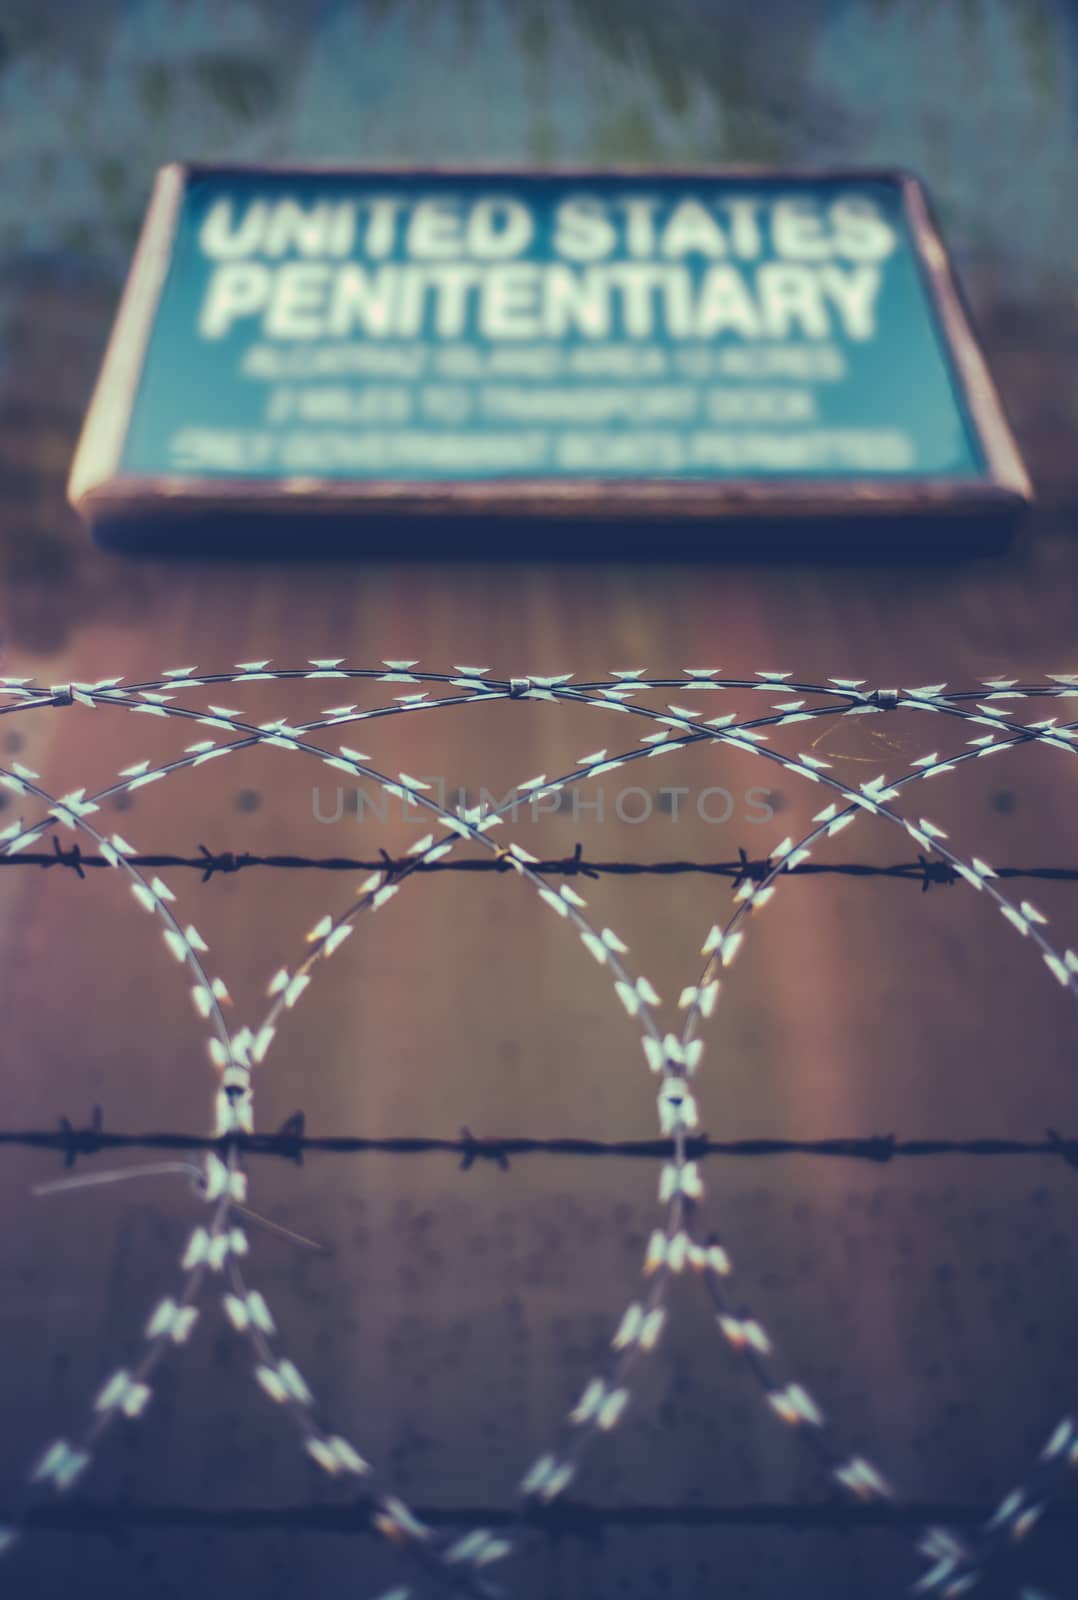 A Sign For A High Security United States Penitentiary Or Prison Behind Razor And Barbed Wire